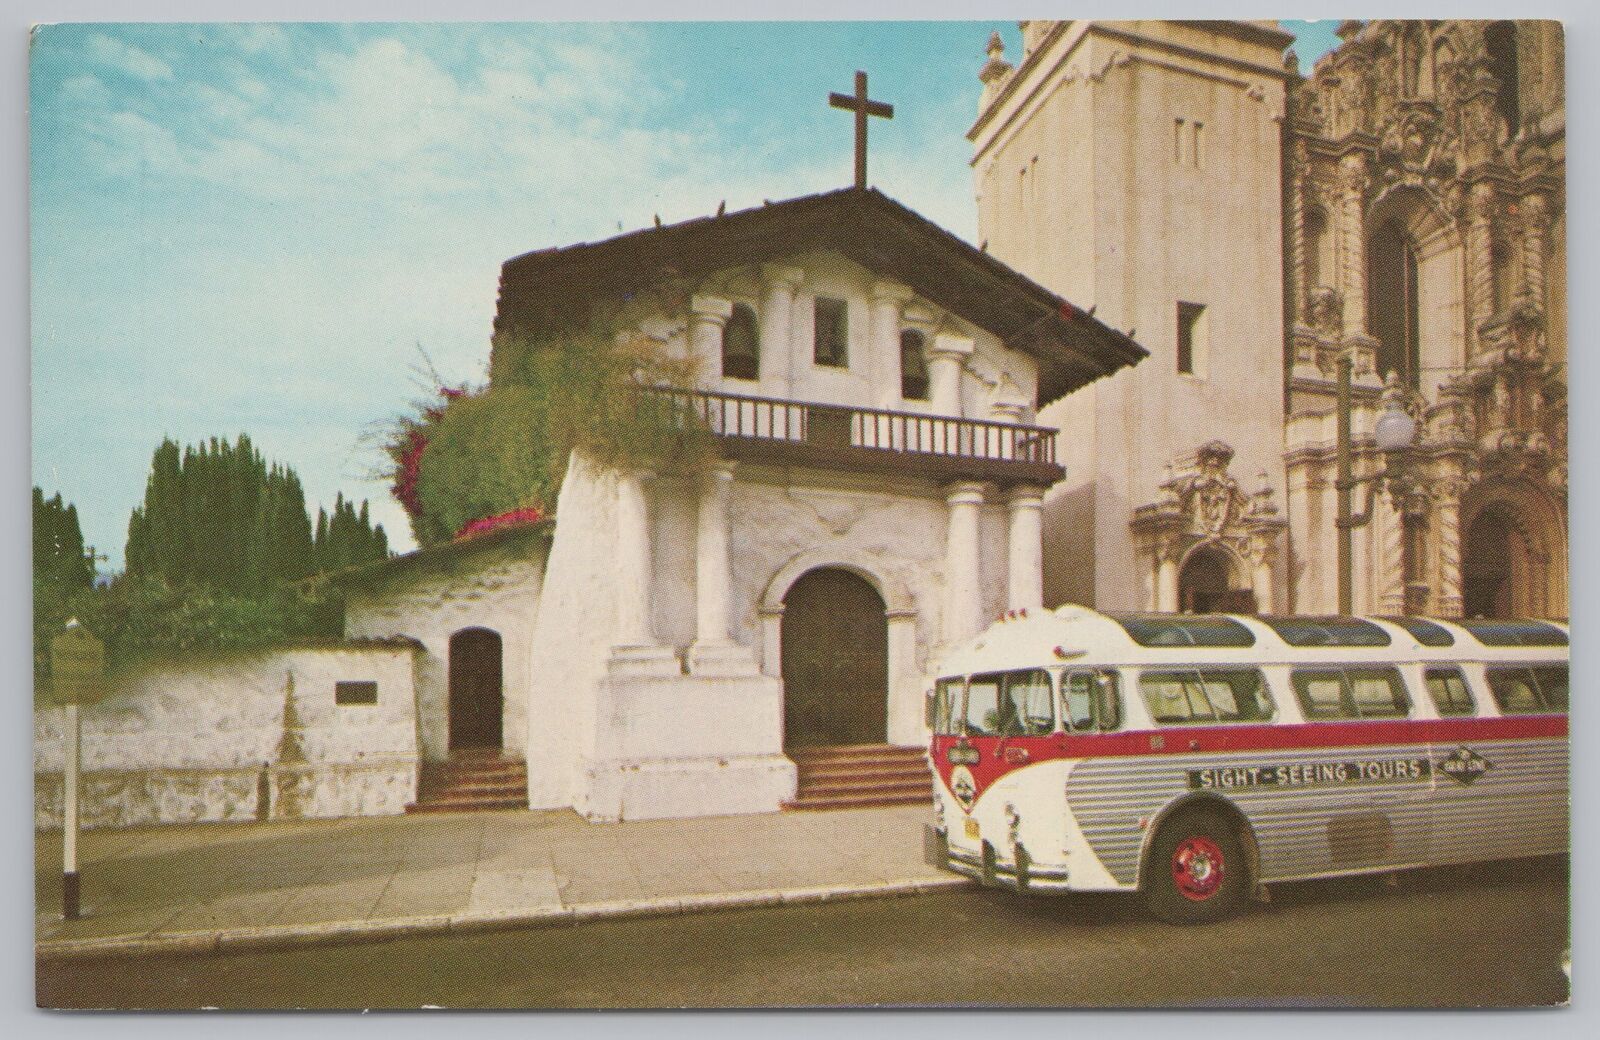 Church & Religious~Mission Delores~Sight Seeing Tours~San Francisco~Vintage PC